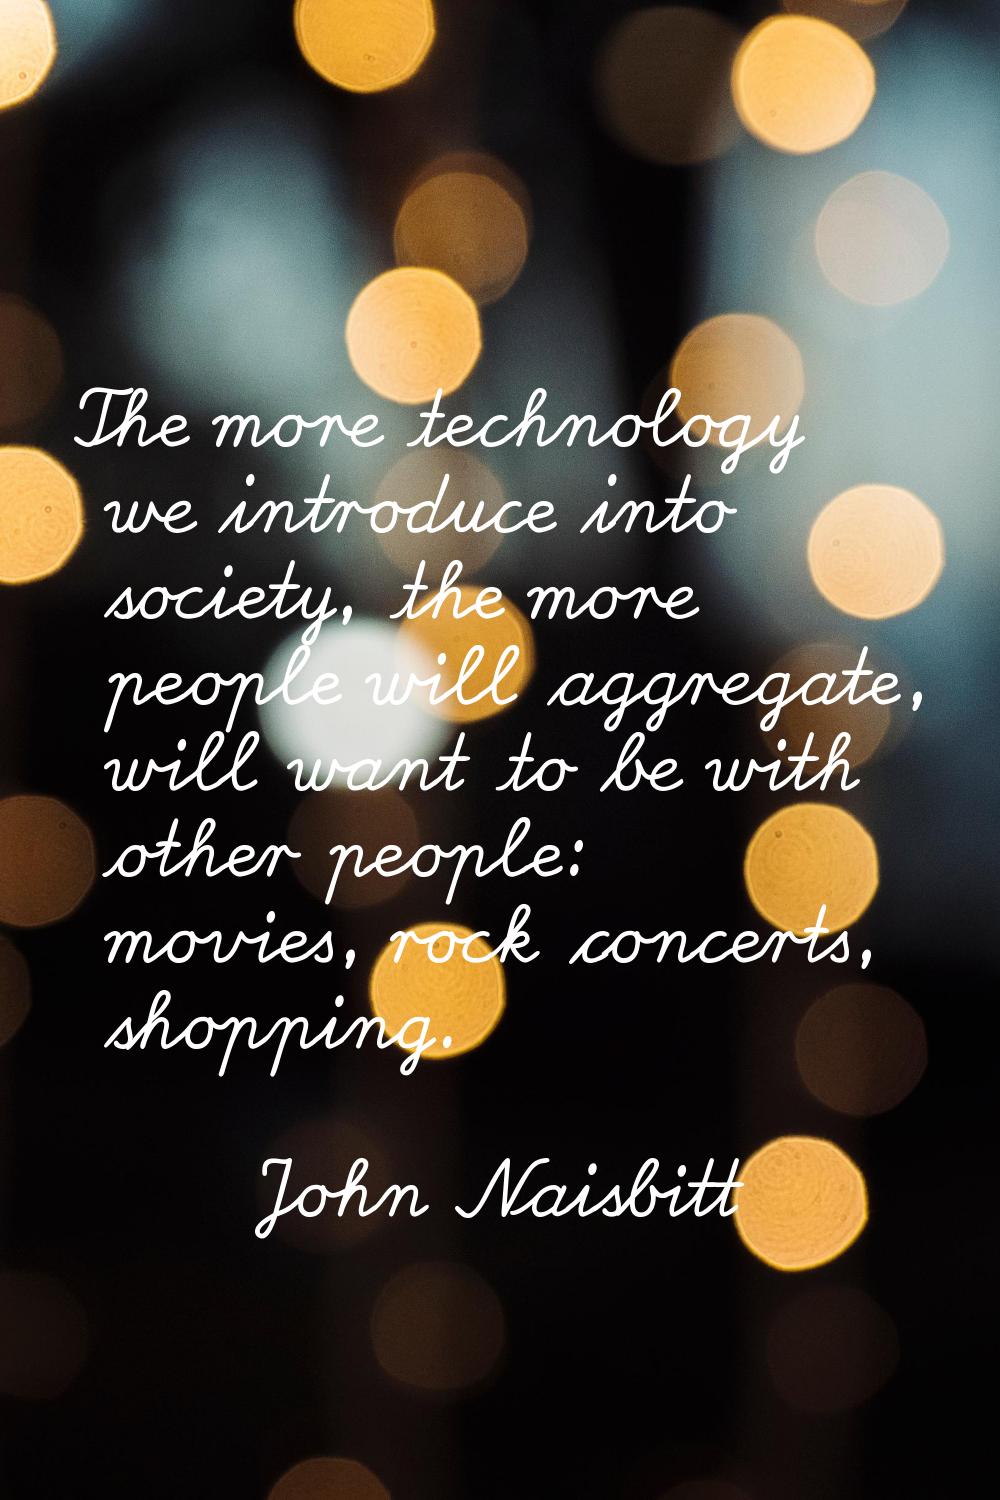 The more technology we introduce into society, the more people will aggregate, will want to be with